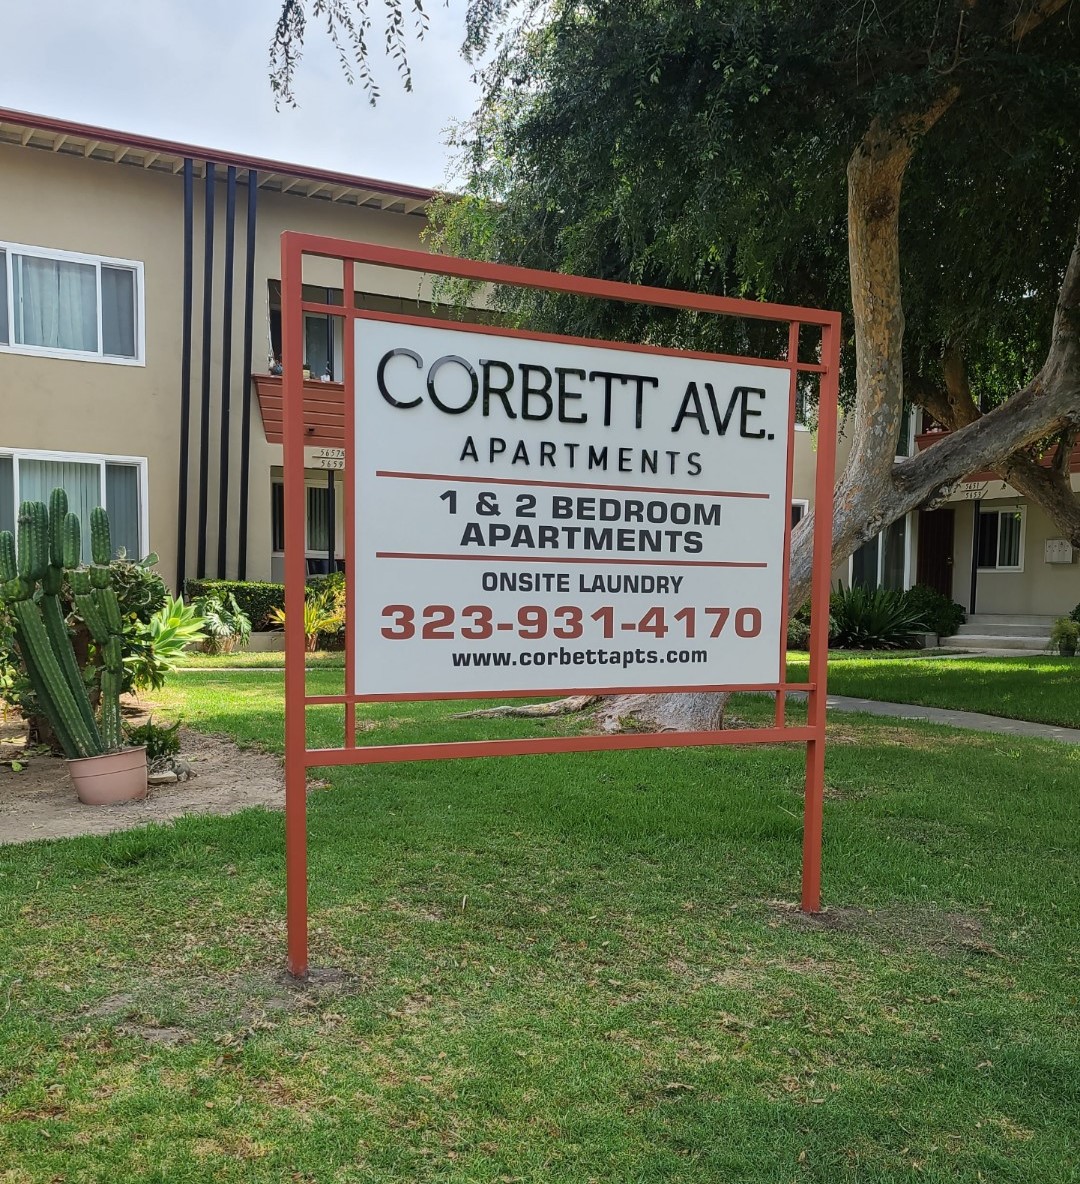 This post and panel apartment sign we fabricated and installed for Jones and Jones shows off their property in Corbett Avenue, Los Angeles,